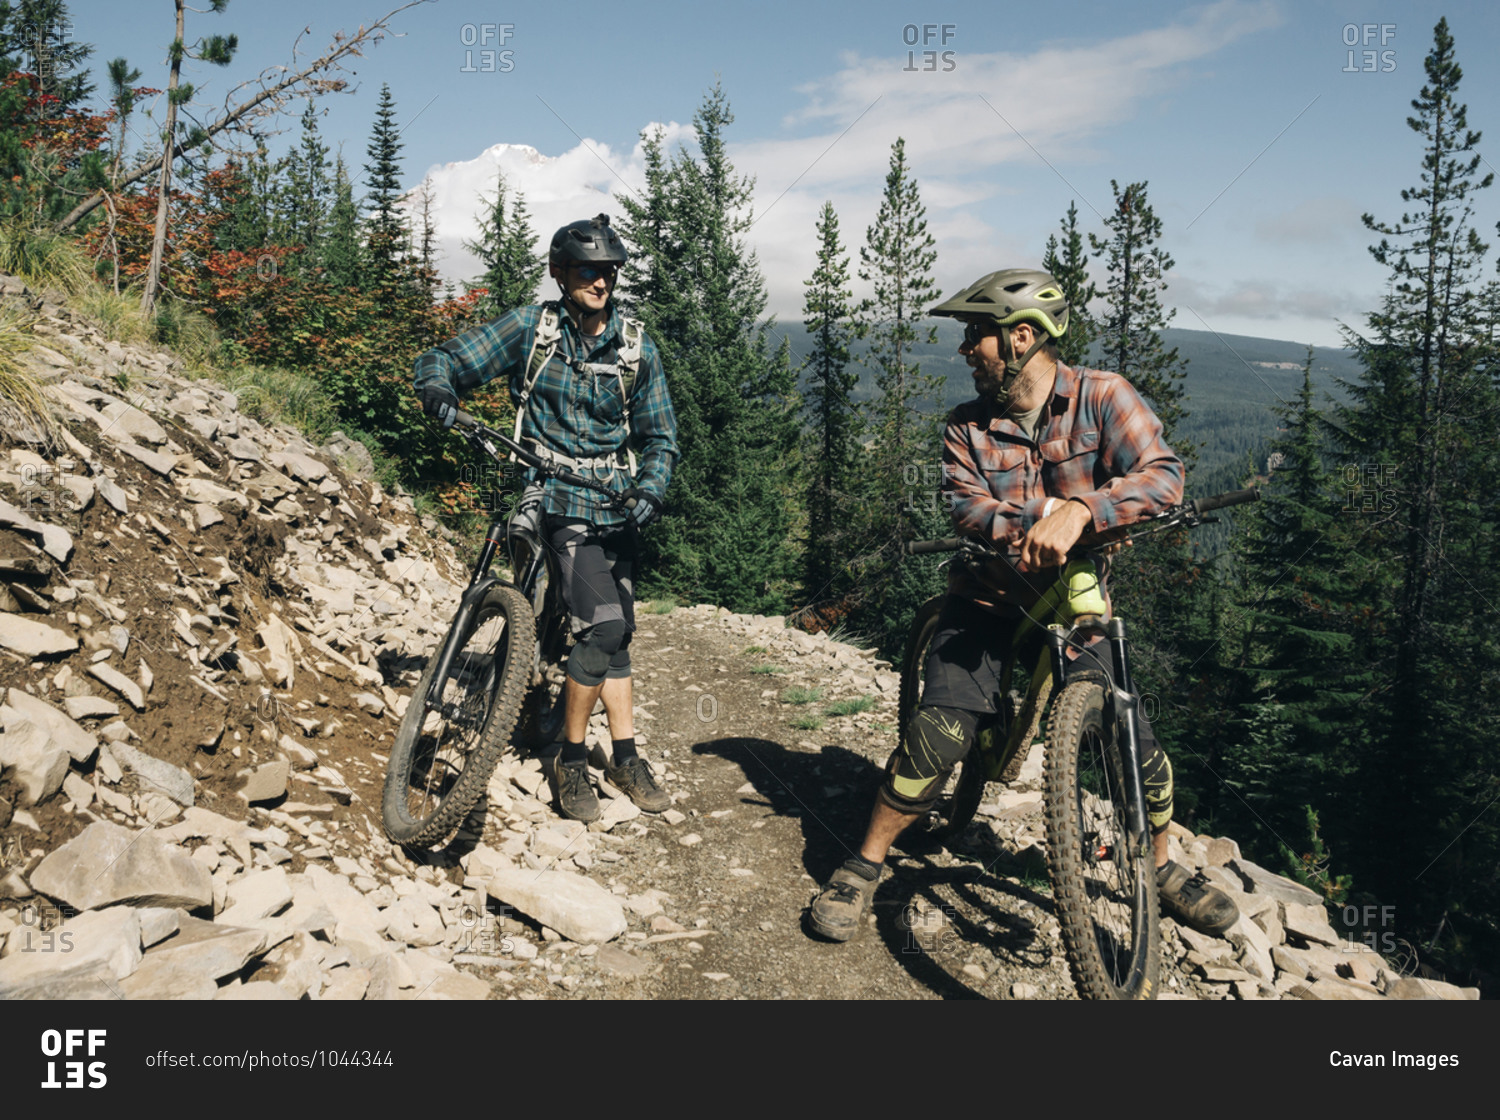 Two bikers take a break on the trail at the Timberline Bike park in OR